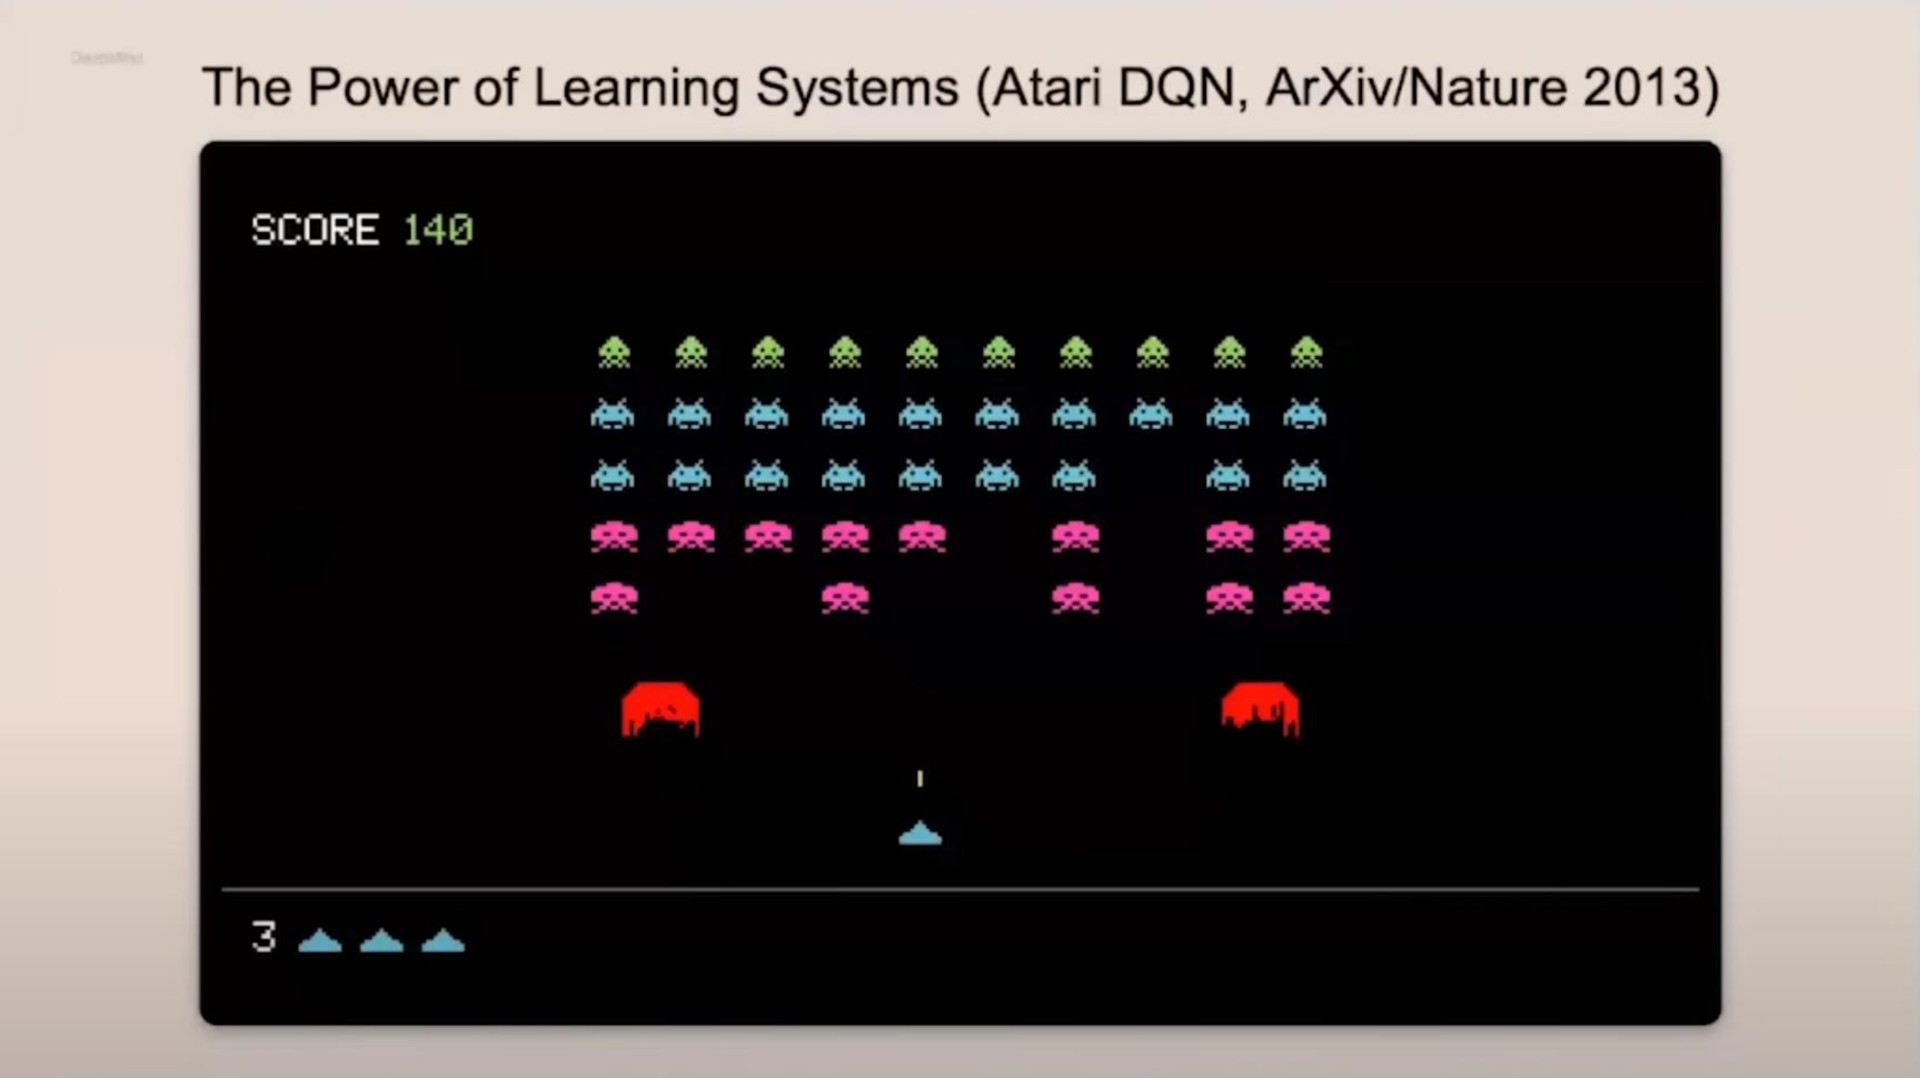 the power of learning systems nature score | DeepMind